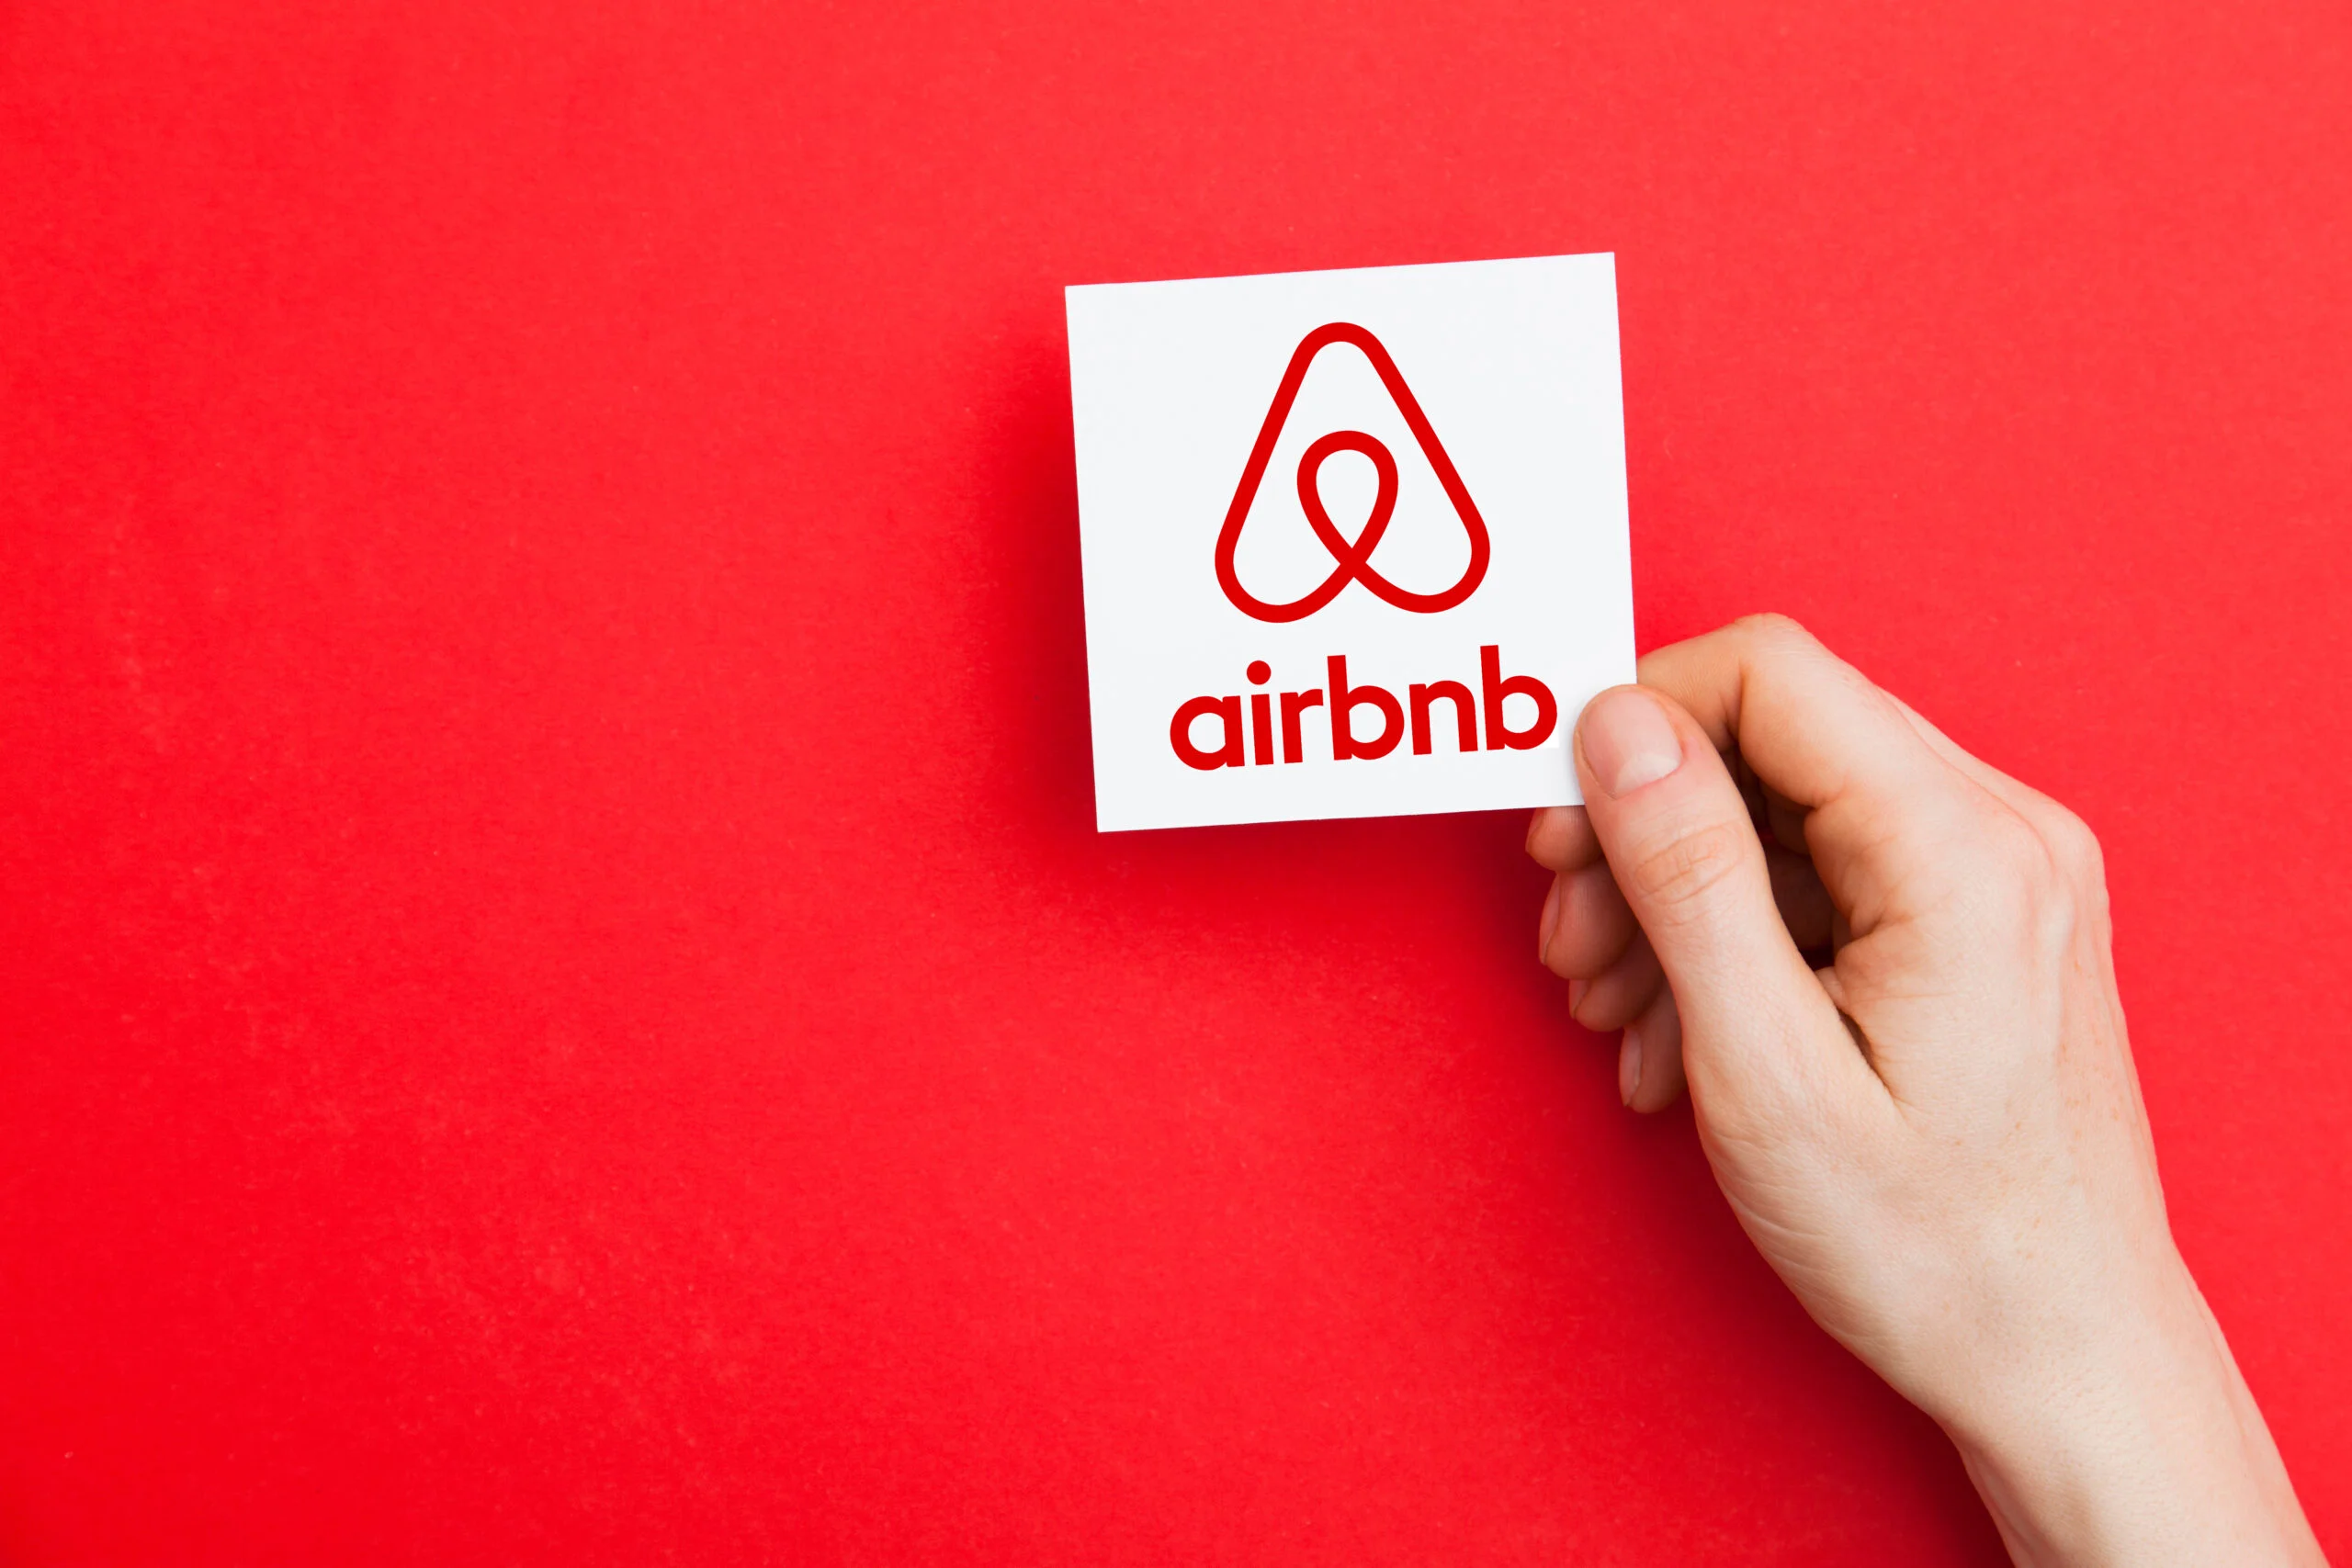 A persons hand holding a card and says 'airbnb' with the logo above.